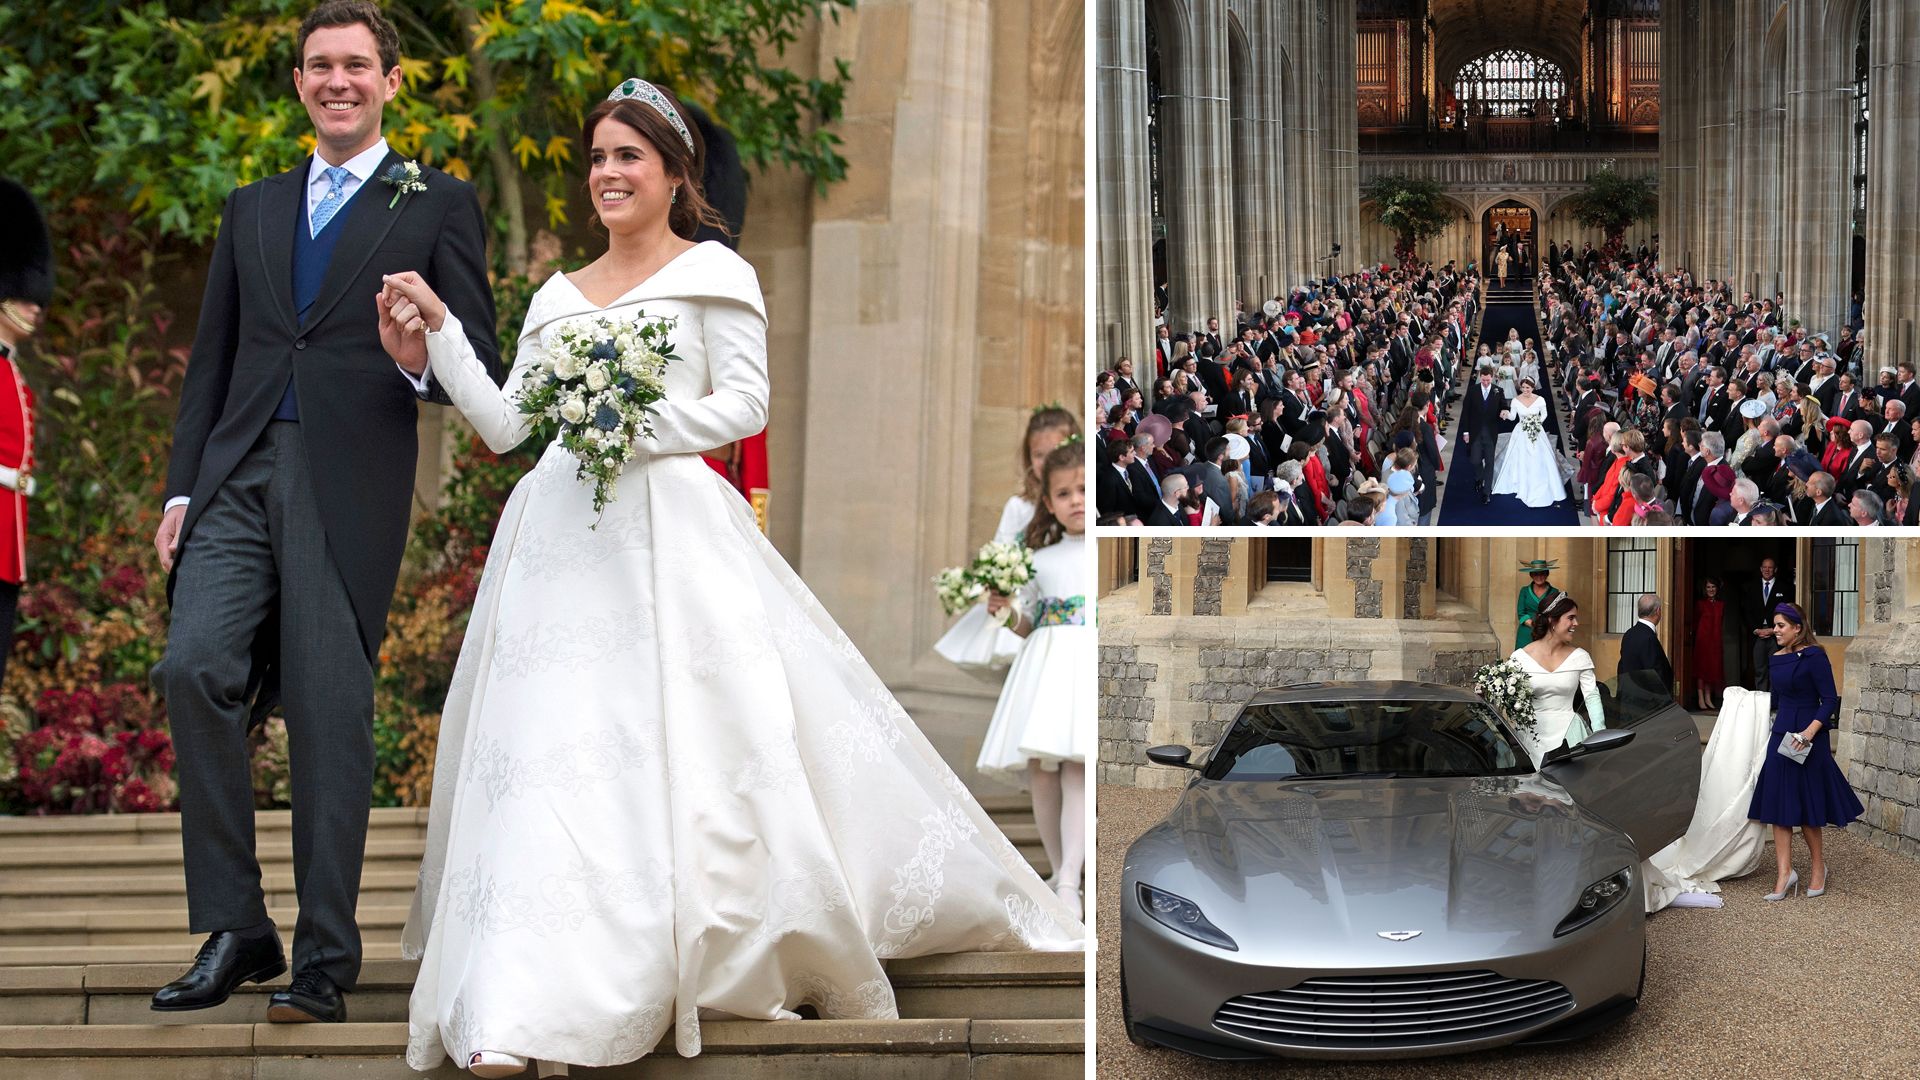 Princess Eugenie and Jack Brooksbank walking down the aisle and getting in the car following their wedding